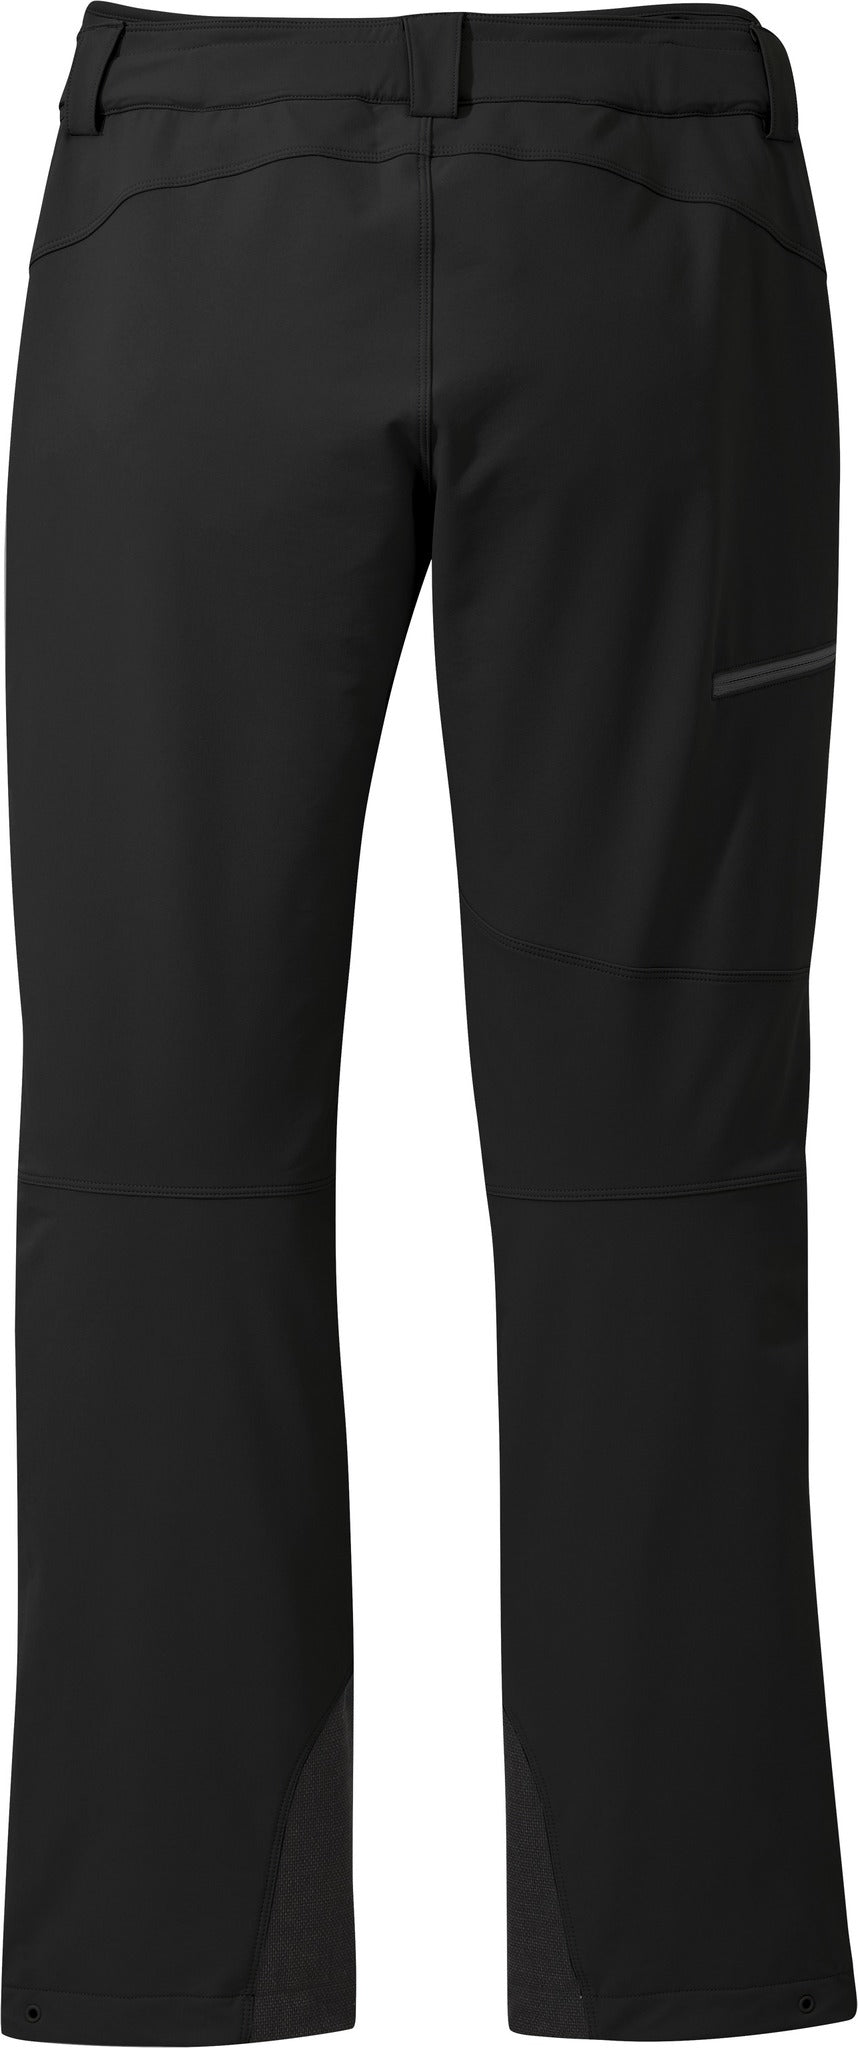 B XTRA BOUTIQUE Women's Modern Fashion Joggers | 95% Polyester & 5% Spandex  | Professional & Comfortable | Indoor & Outdoor